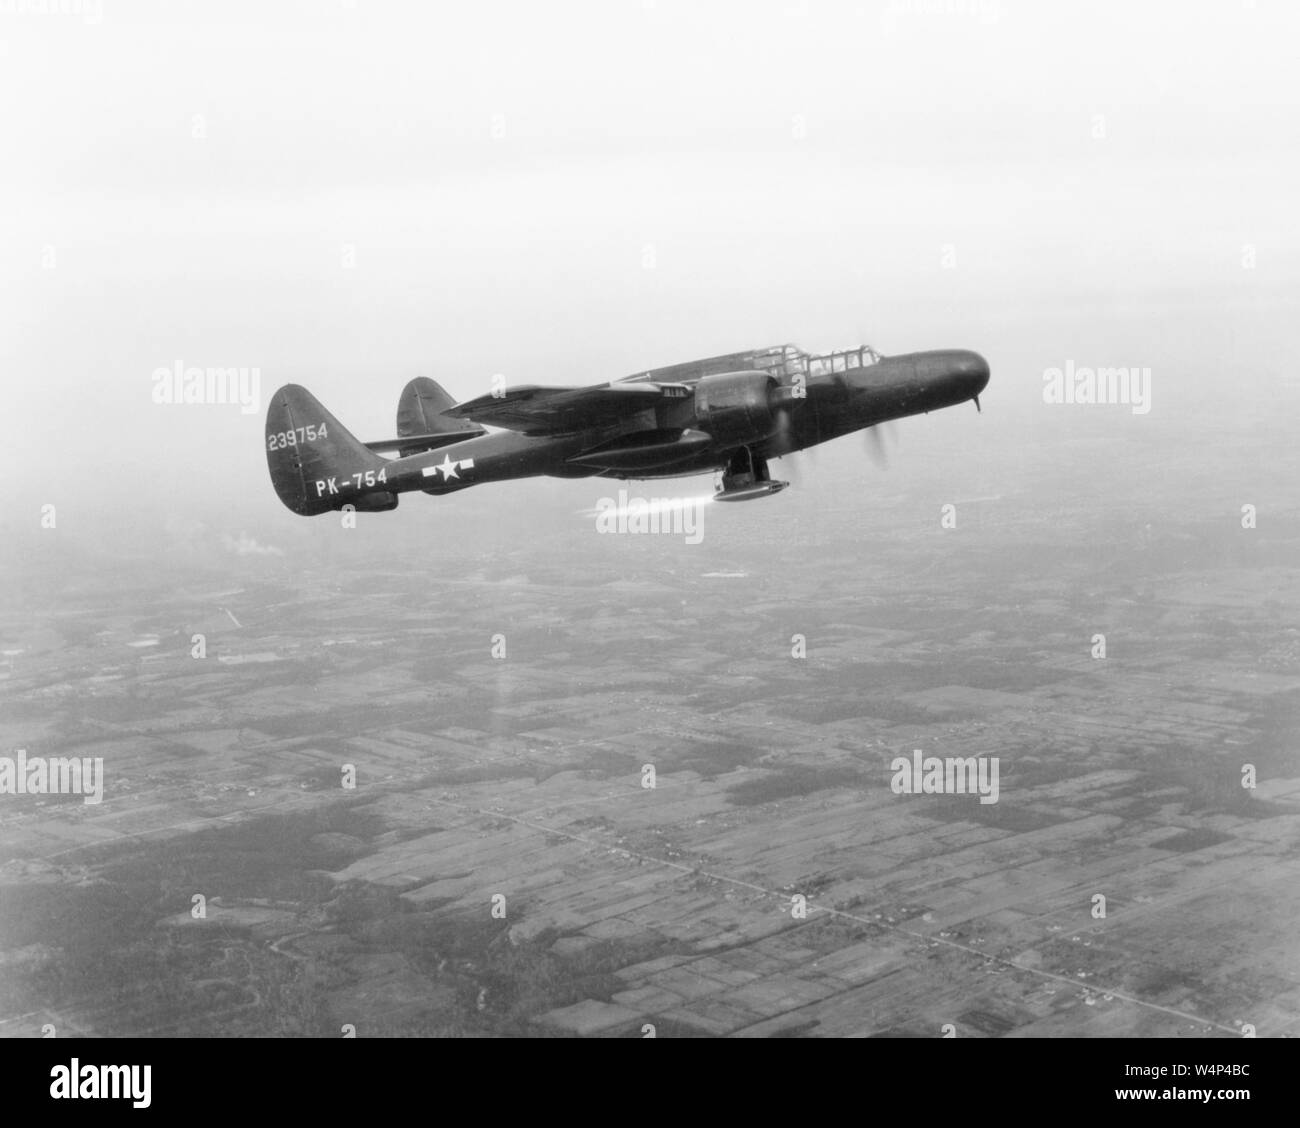 P-61 airplane in a test flight with ramjet burning, January 27, 1947. Image courtesy National Aeronautics and Space Administration (NASA). () Stock Photo